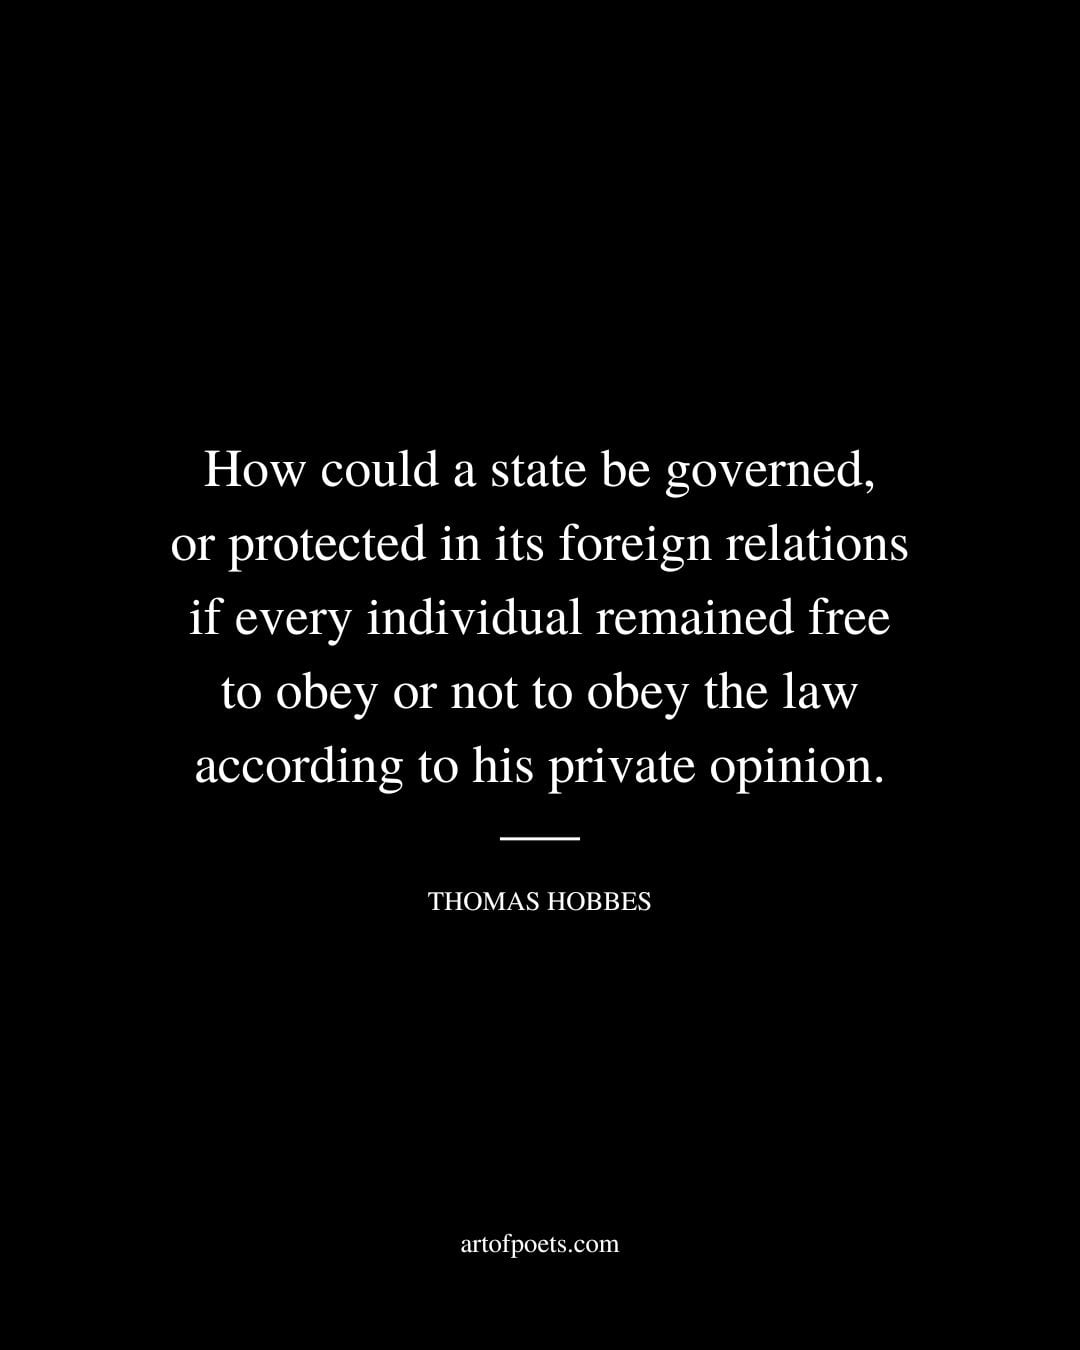 How could a state be governed or protected in its foreign relations if every individual remained free to obey